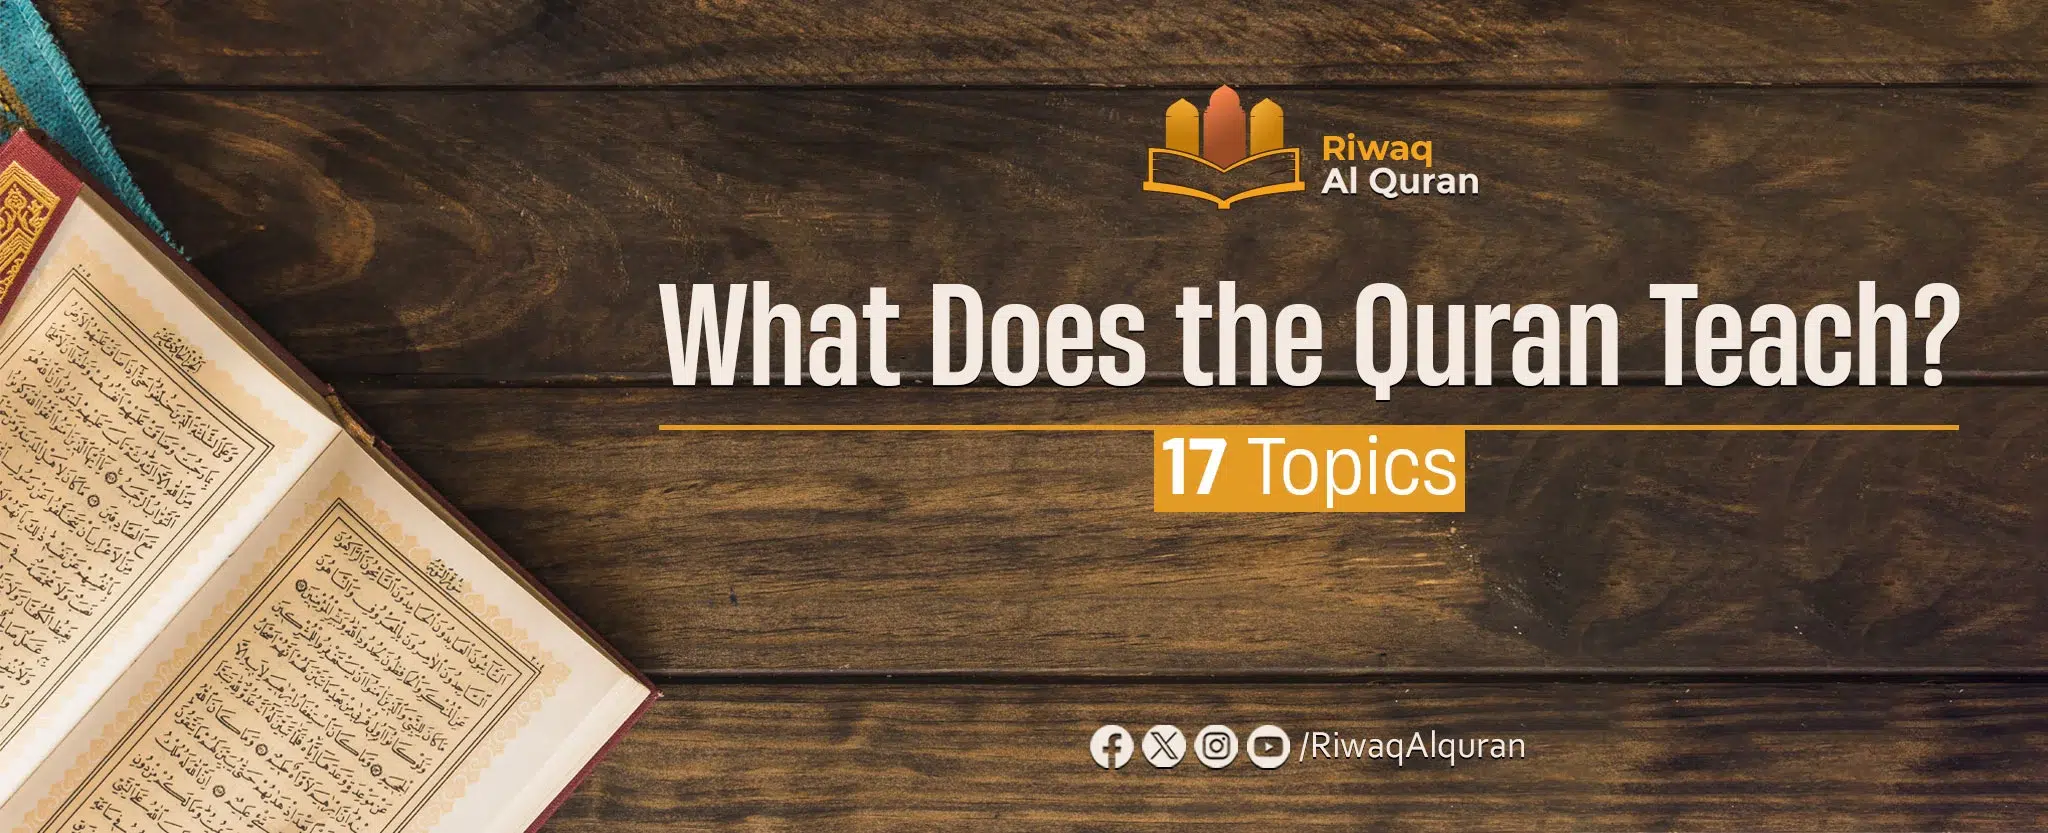 What Does the Quran Teach? Top 17 Teachings From The Quran